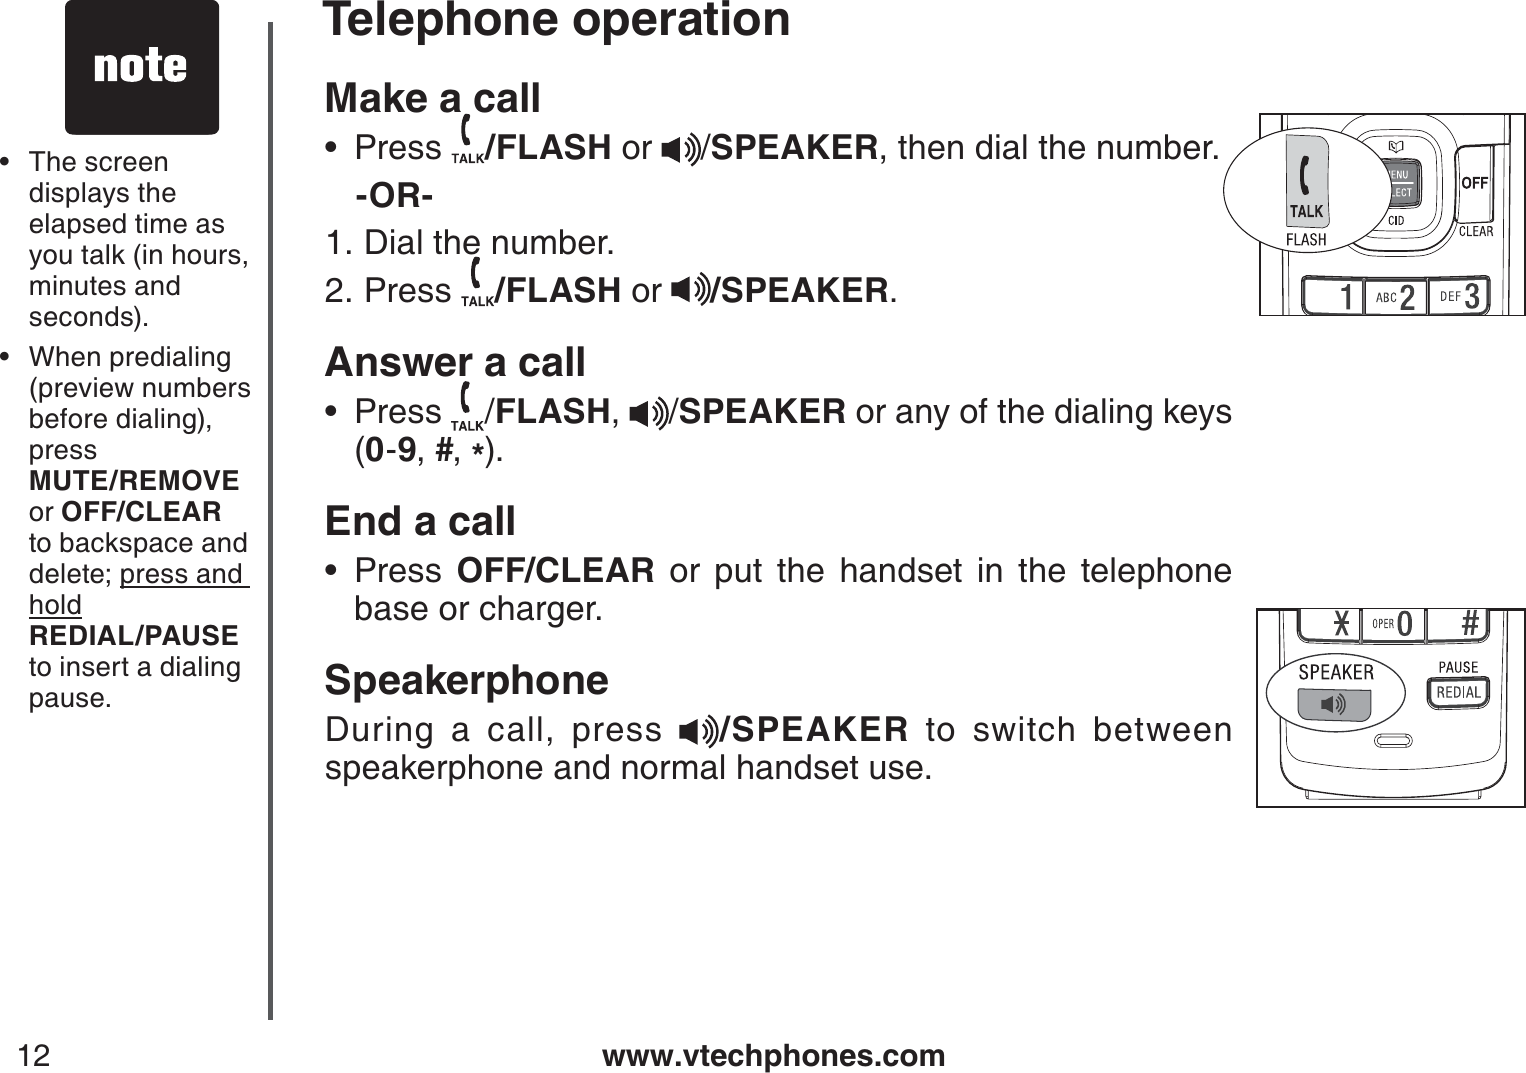 www.vtechphones.com12Make a call Press  /FLASH or  /SPEAKER, then dial the number.   -OR-Dial the number.Press  /FLASH or  /SPEAKER.Answer a callPress  /FLASH, /SPEAKER or any of the dialing keys     (0-9,#,*).End a callPress  OFF/CLEAR or put the handset in the telephone base or charger.SpeakerphoneDuring a call, press  /SPEAKER to switch between speakerphone and normal handset use.•1.2.••The screen displays the elapsed time as you talk (in hours, minutes and seconds).When predialing (preview numbers before dialing), press    MUTE/REMOVE or OFF/CLEARto backspace and delete; press and hold   REDIAL/PAUSEto insert a dialing pause.••Telephone operation